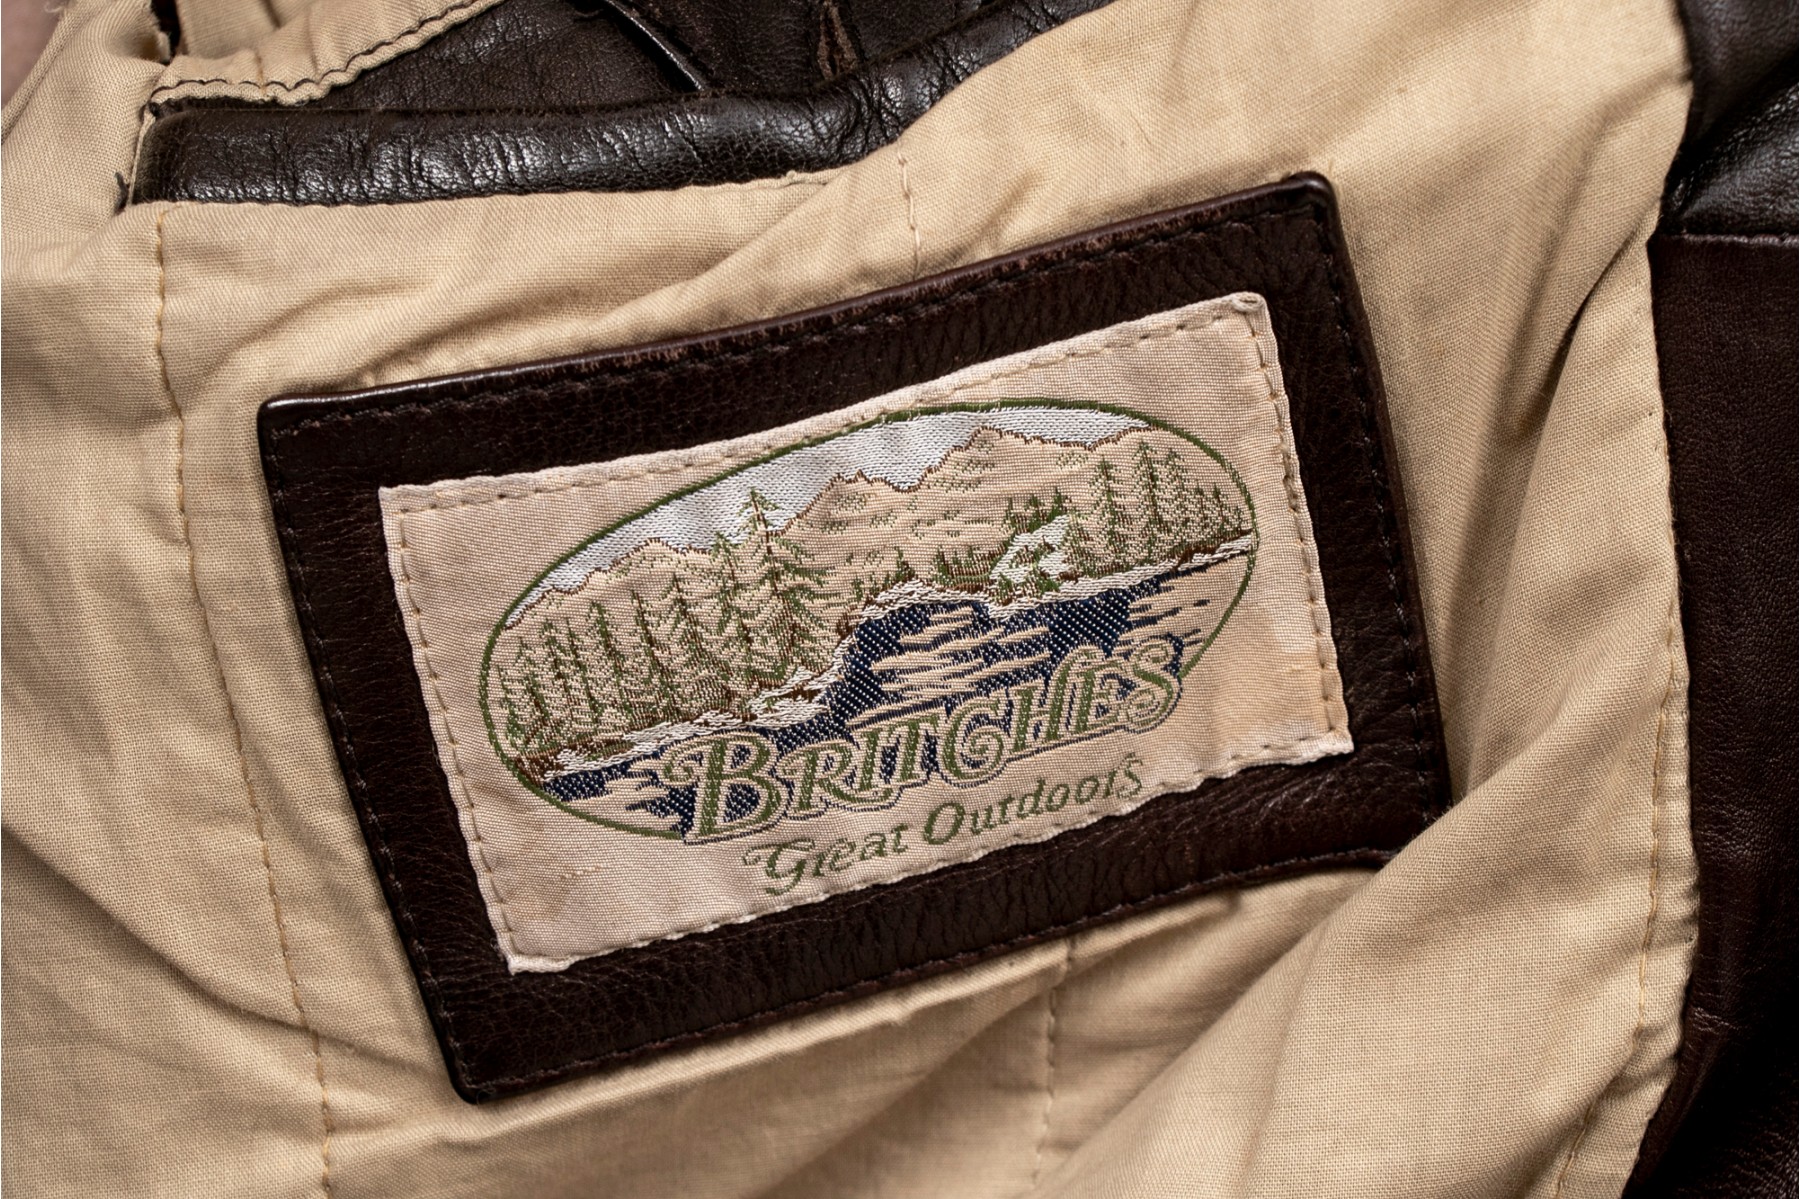 Our Collection – Britches Great Outdoors